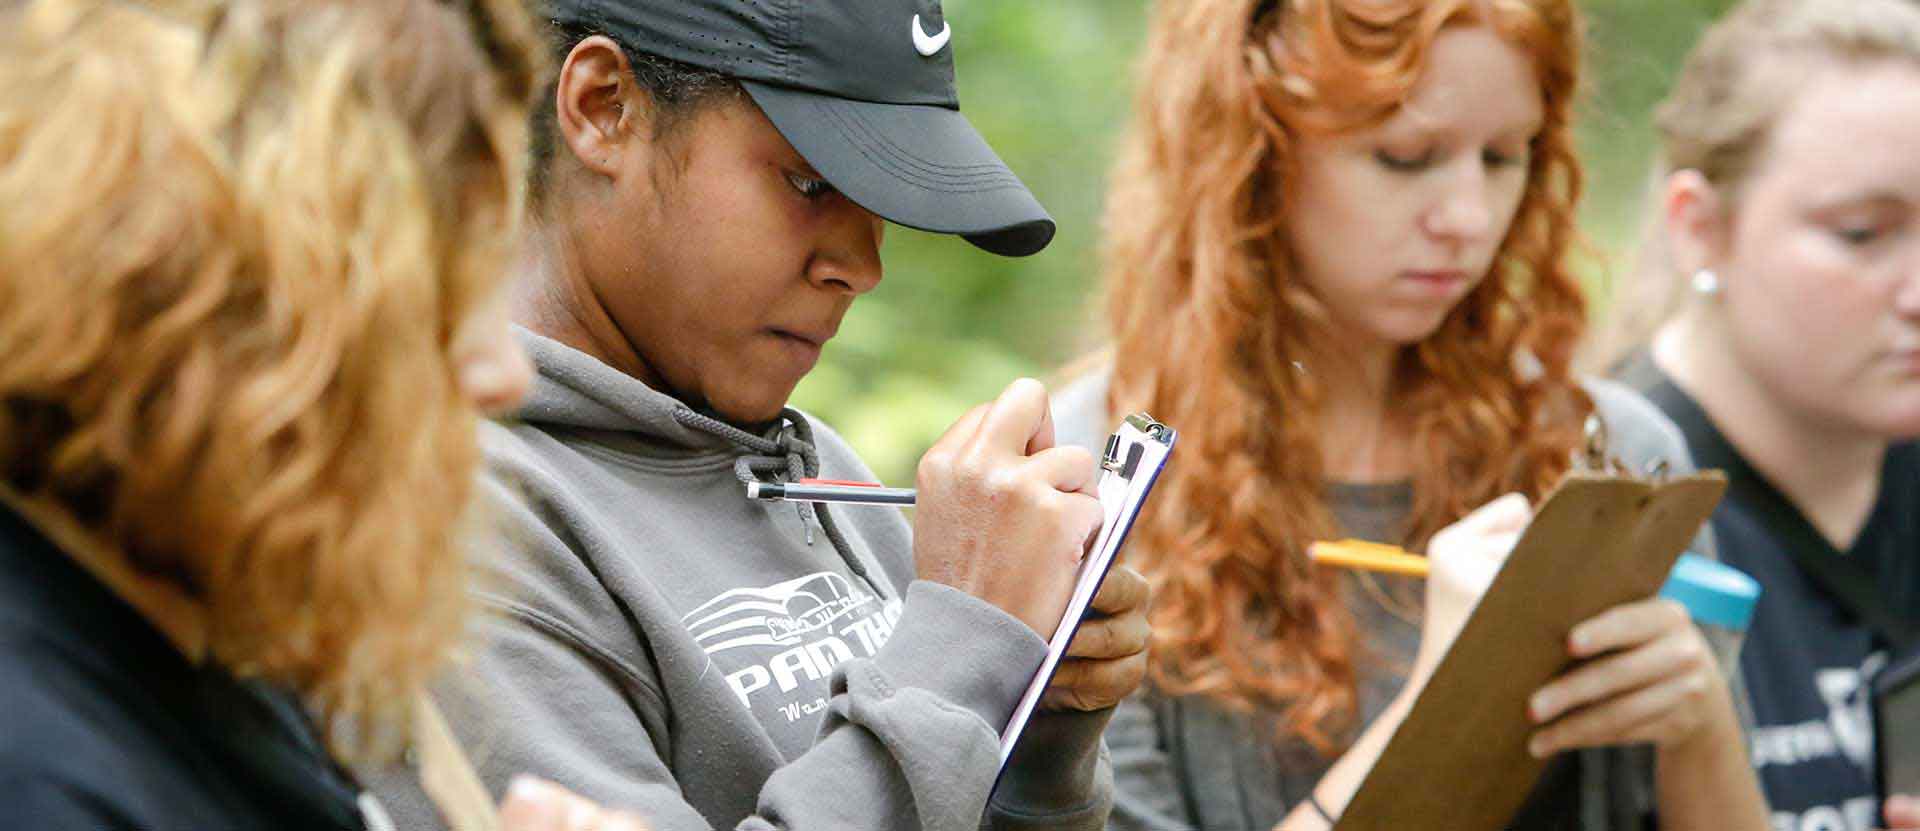 Students collect data from the Arboretum